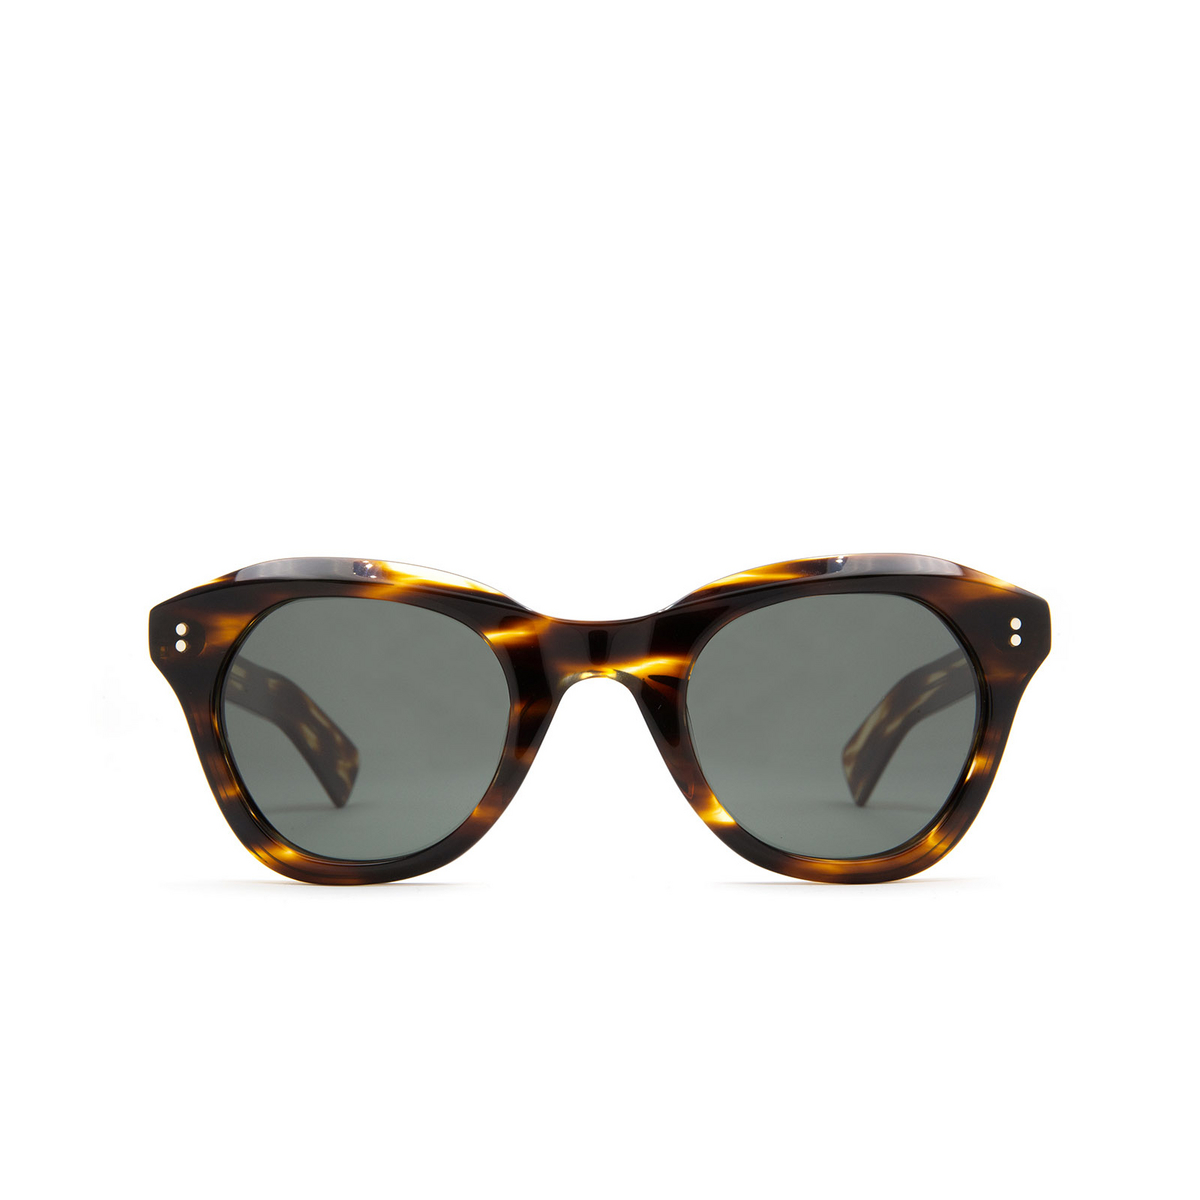 Lesca® Square Sunglasses: Looping color Striped Havana A3 - front view.